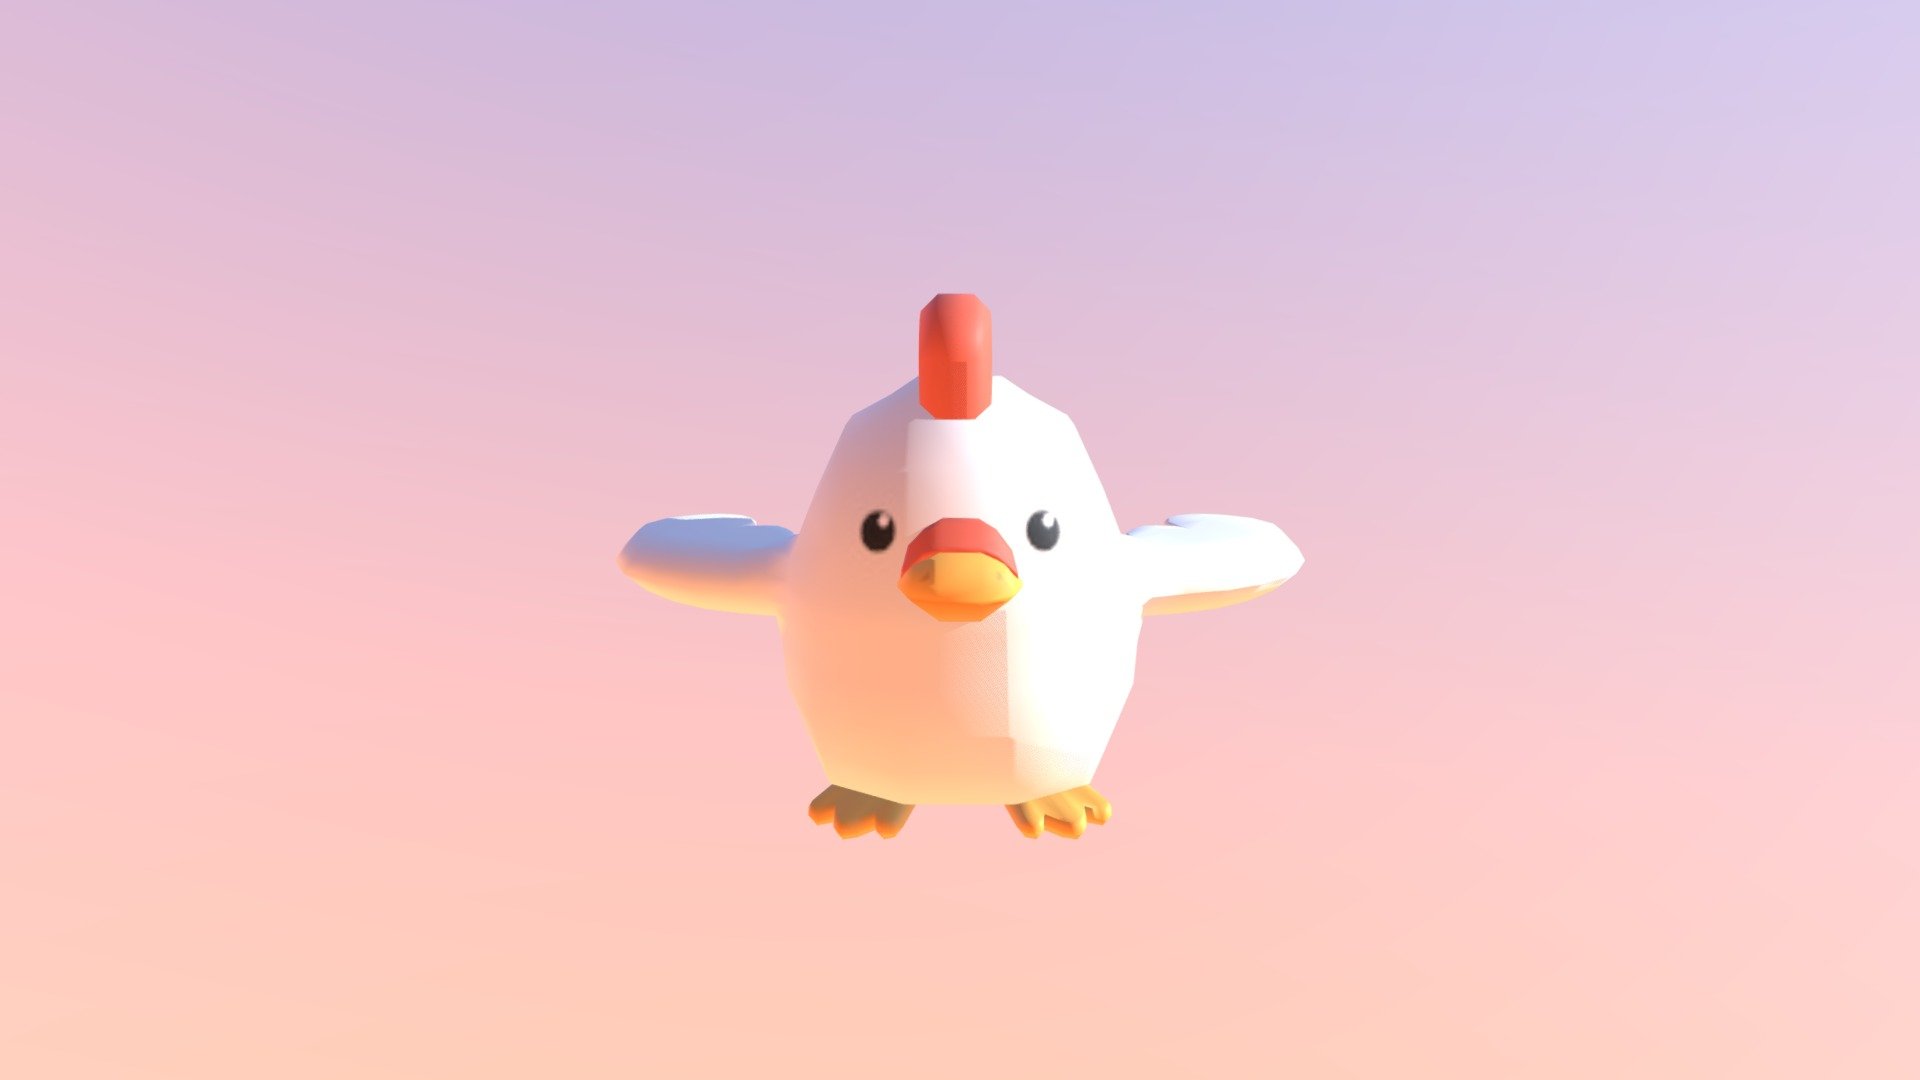 Chicken Asset I made for the game Udder Nonsense.
For more information see https://www.christietanjaya.com/udder-nonsense - Chicken Asset - Udder Nonsense - 3D model by caixue 3d model